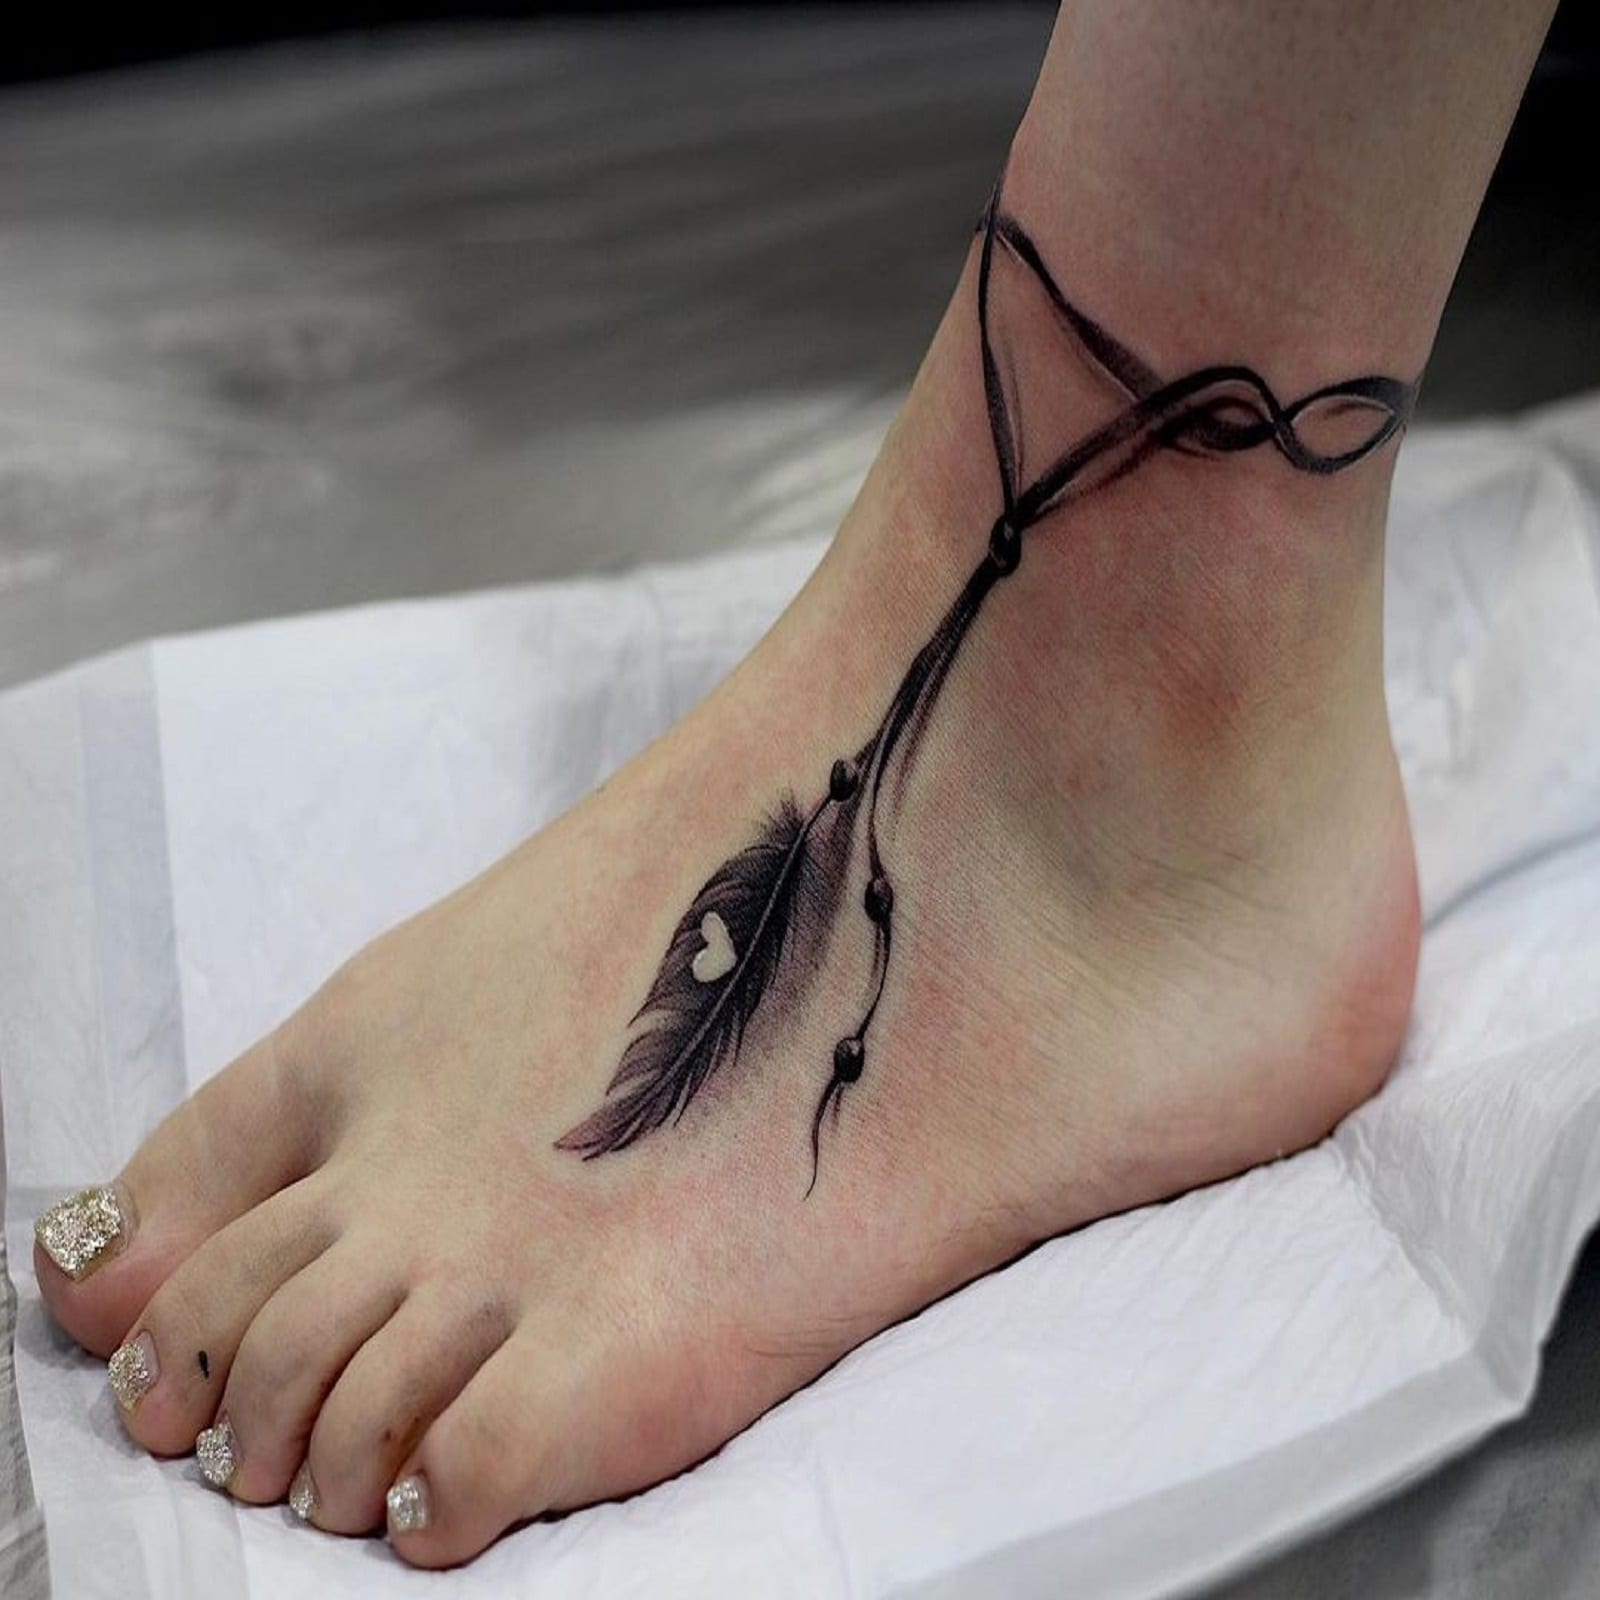 Ankle Tattoo Design Ideas and Pictures  Tattdiz